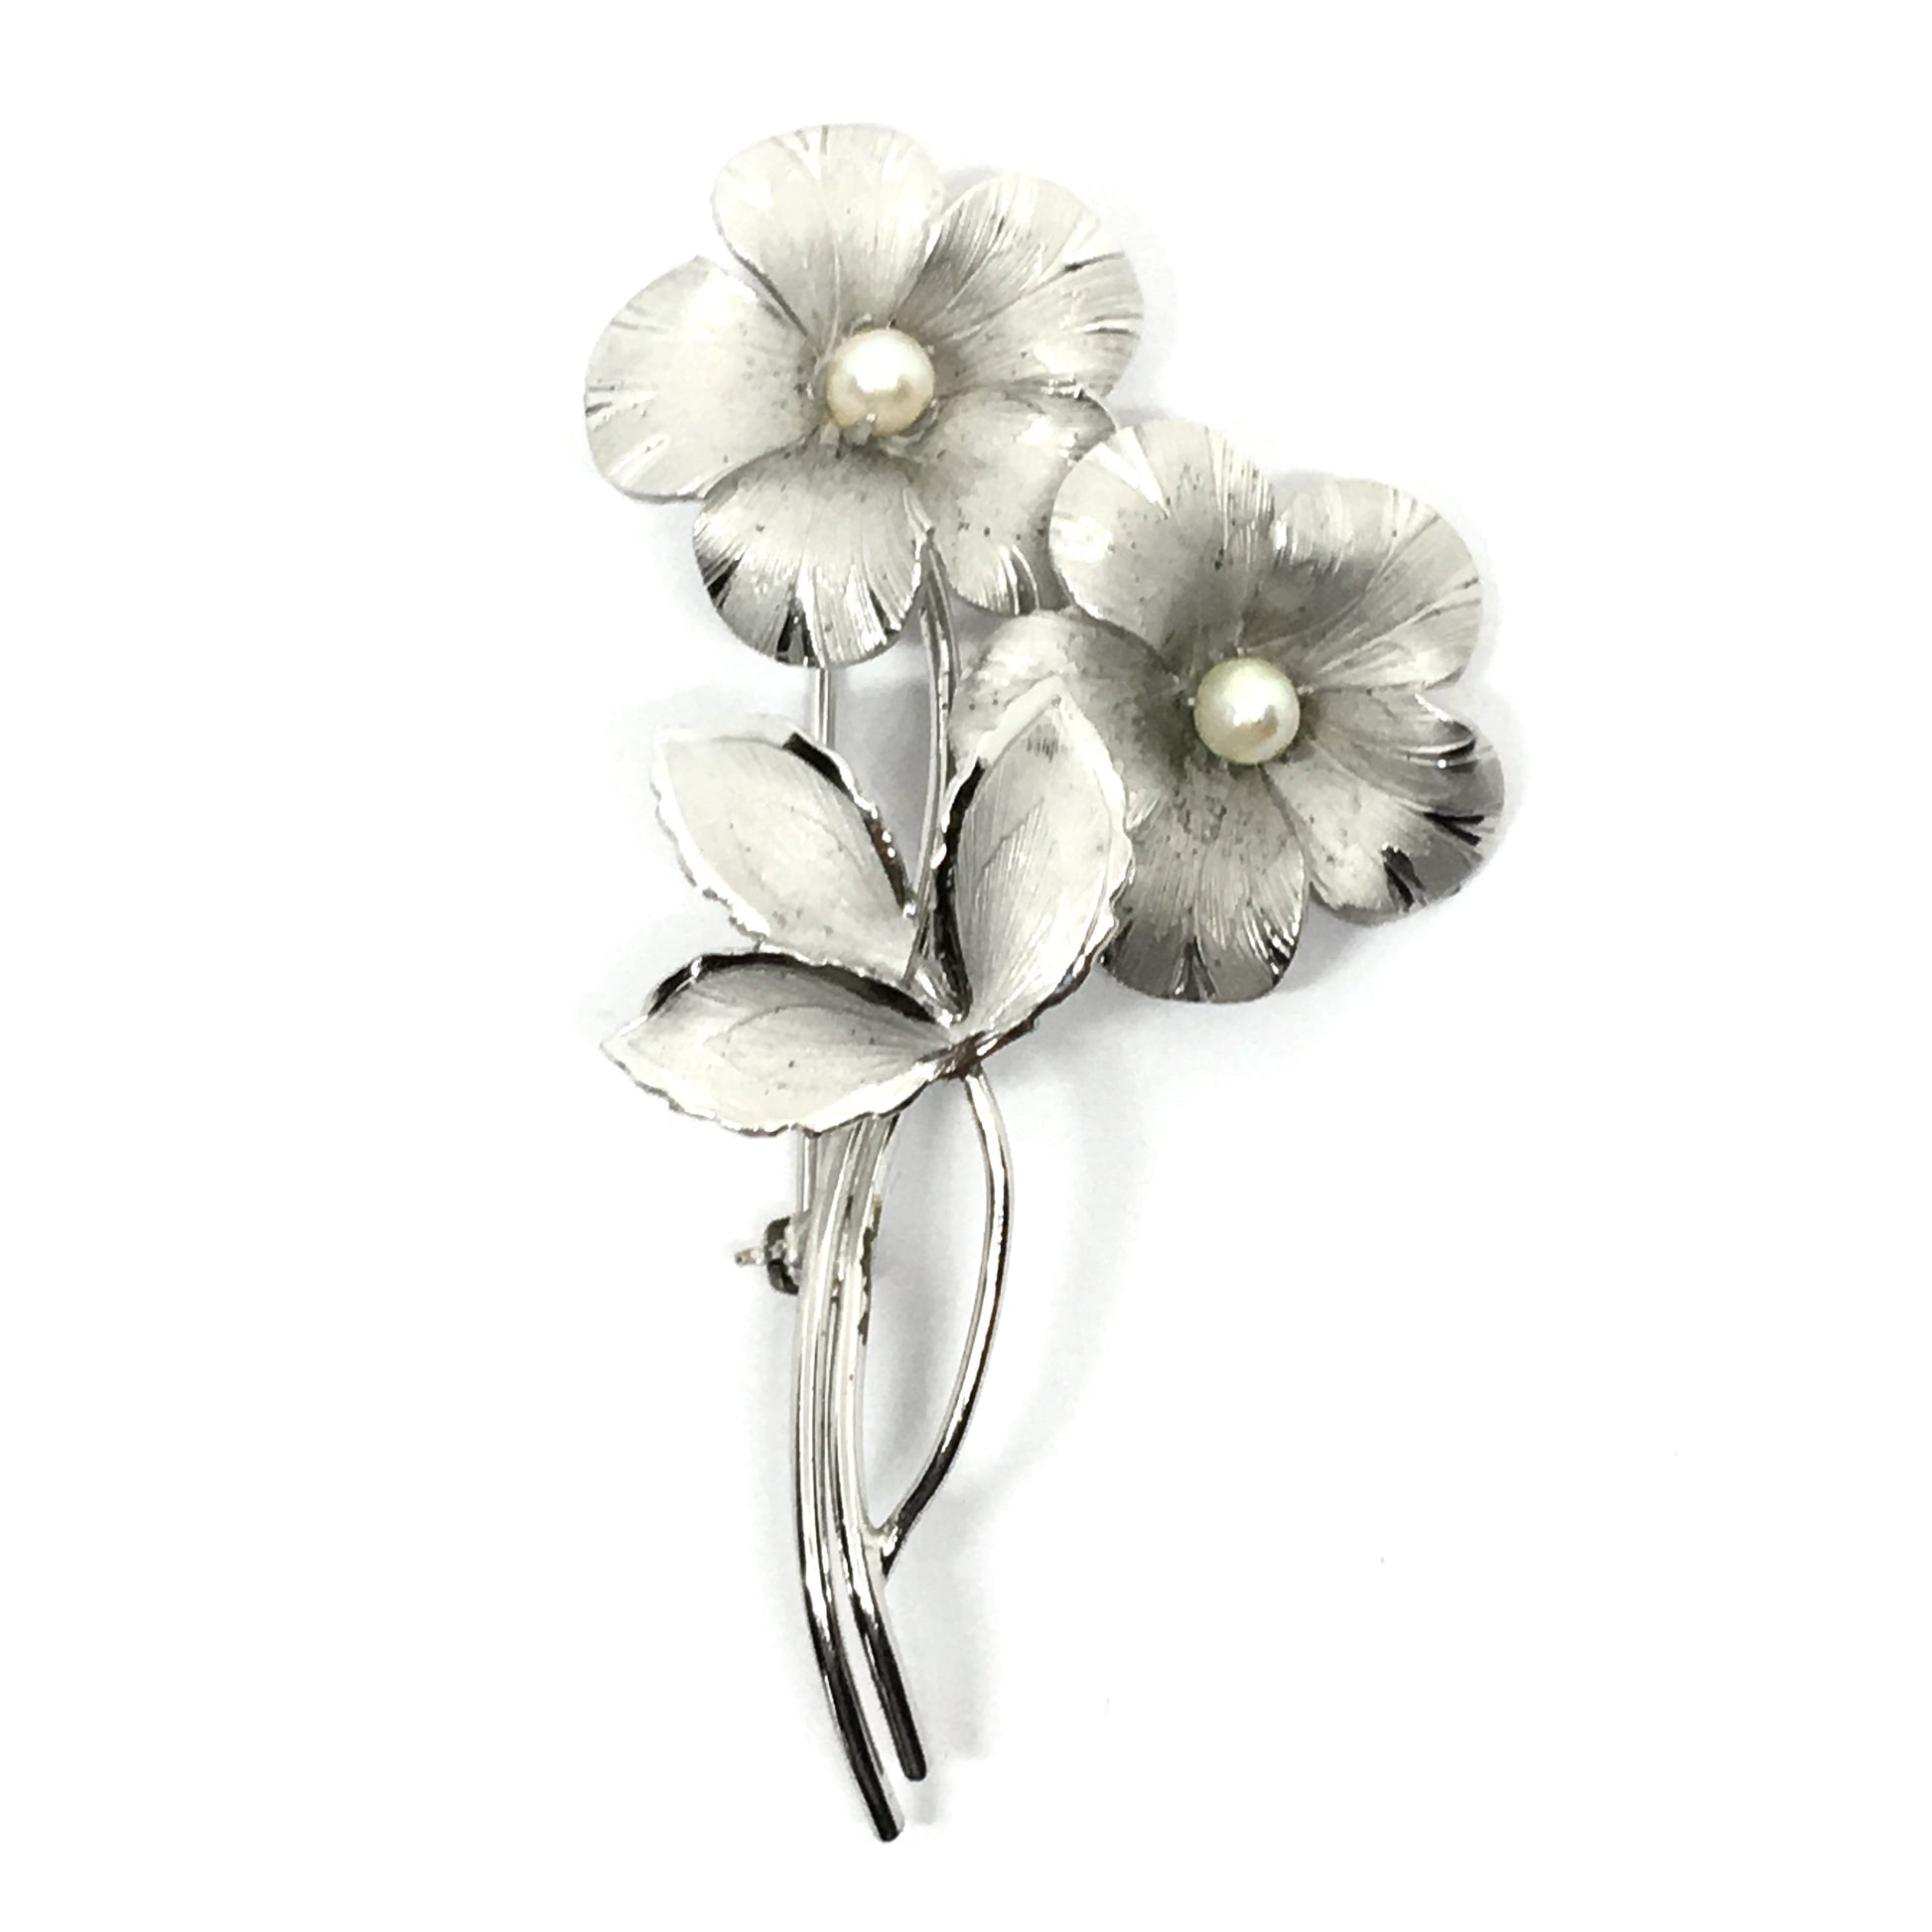 Blingschlingers Jewelry USA Brooches & Lapel Pins | Enchanting Vintage Sterling Silver Dandelion Design Pearl Brooch